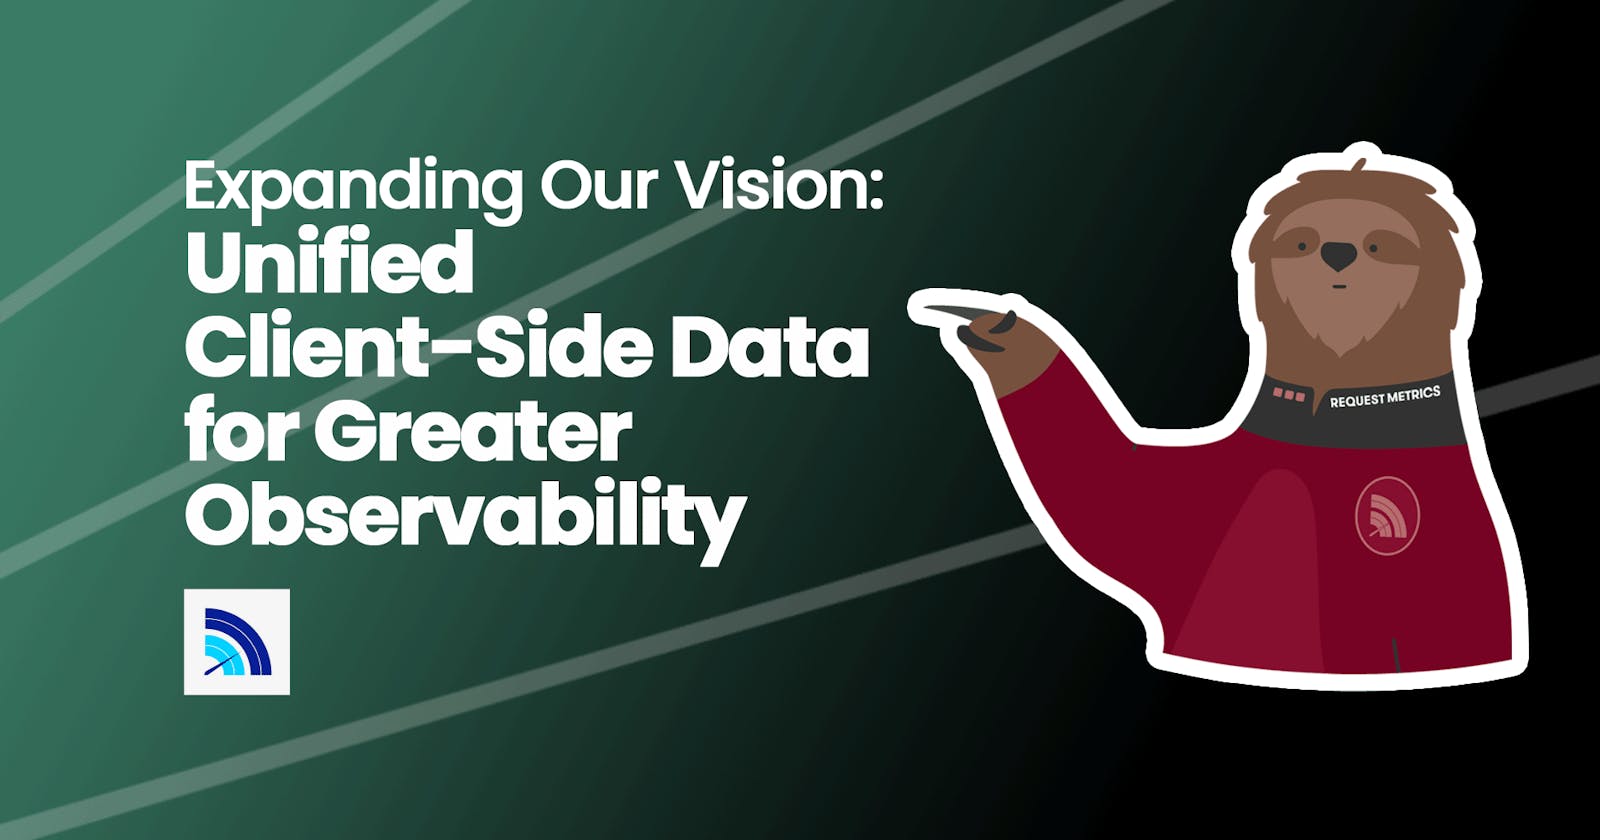 Expanding Our Vision: Unifying Client-Side Observability Data